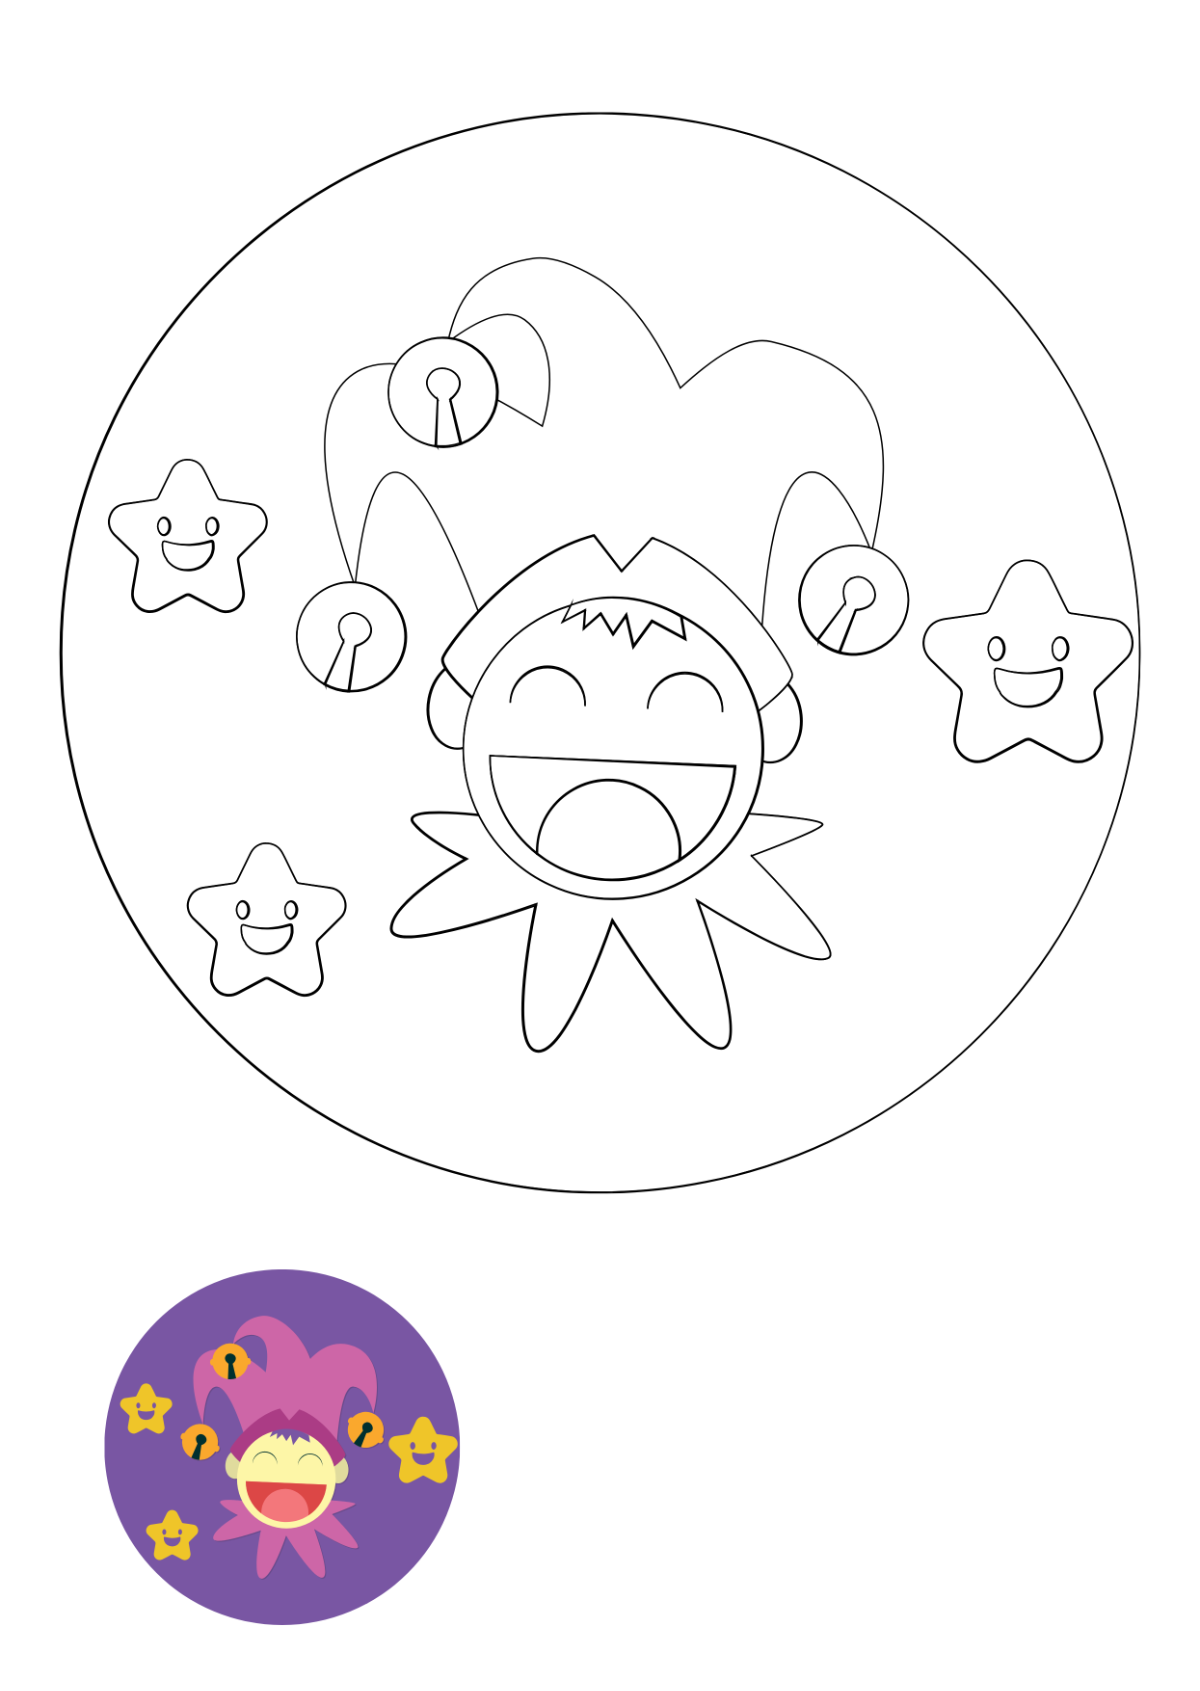 Cute April Fools’ Day Coloring Page Template